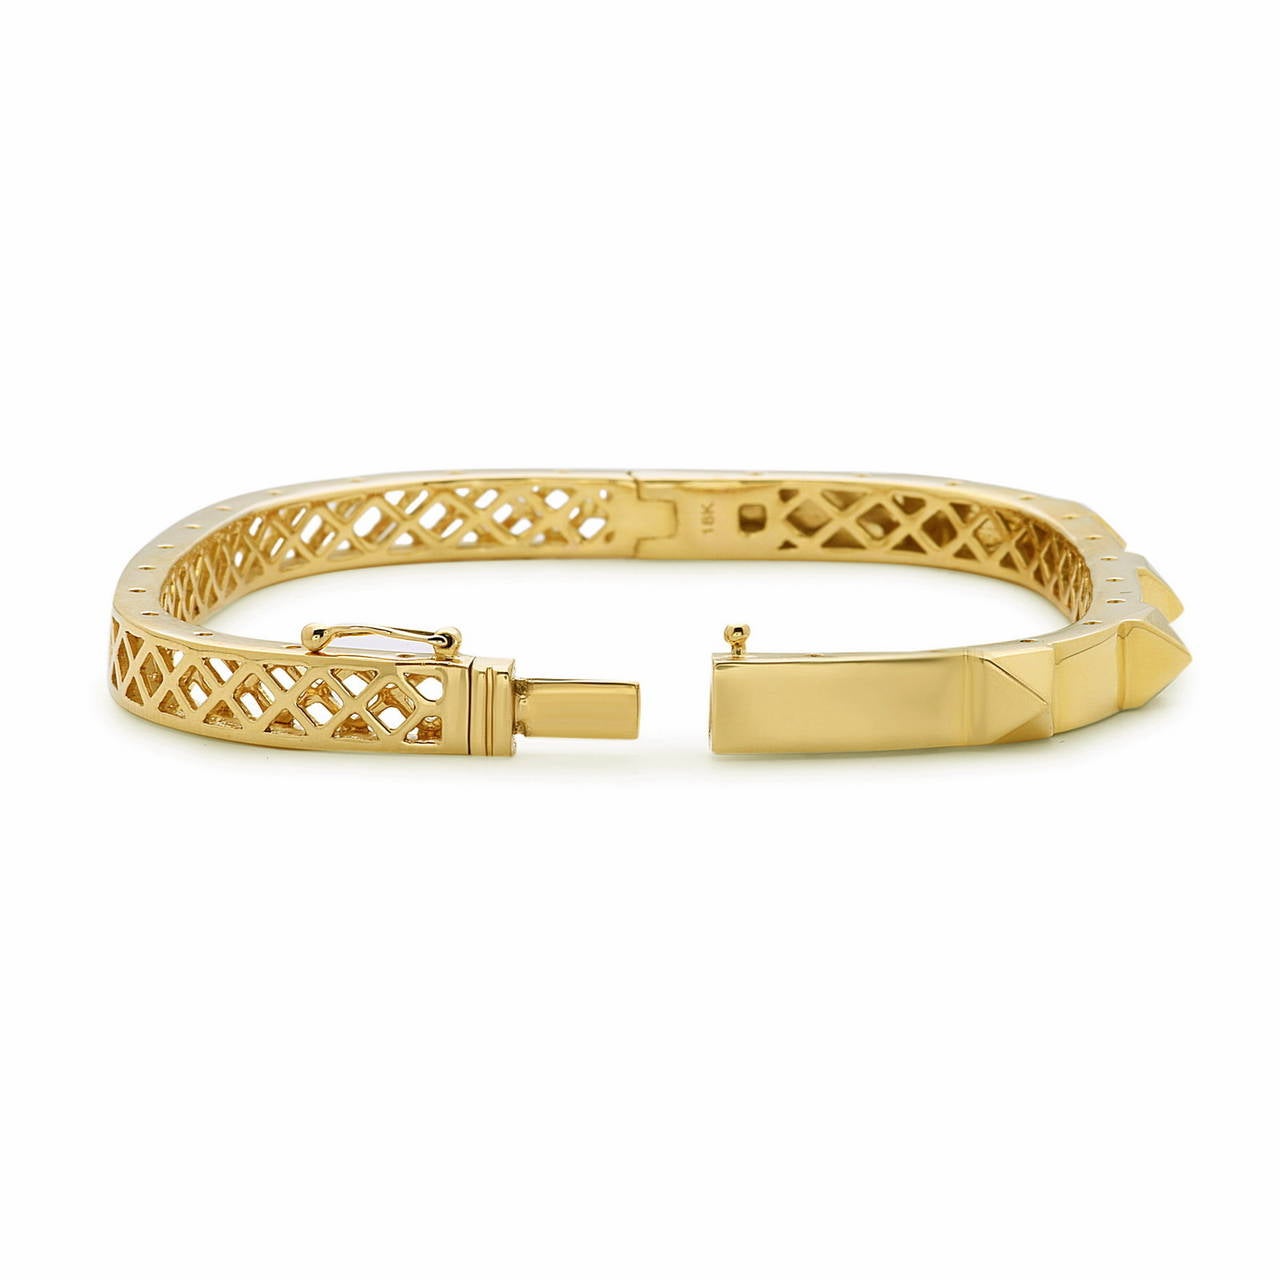 18K Cushion Shaped Spike Yellow Gold Bangle is openable and very comfortable and to wear. It has a very intricate gold work on the back side of the bangle. Gold weight: 23.16gms 18K. Wrist size: 2.2x1.4 inches.